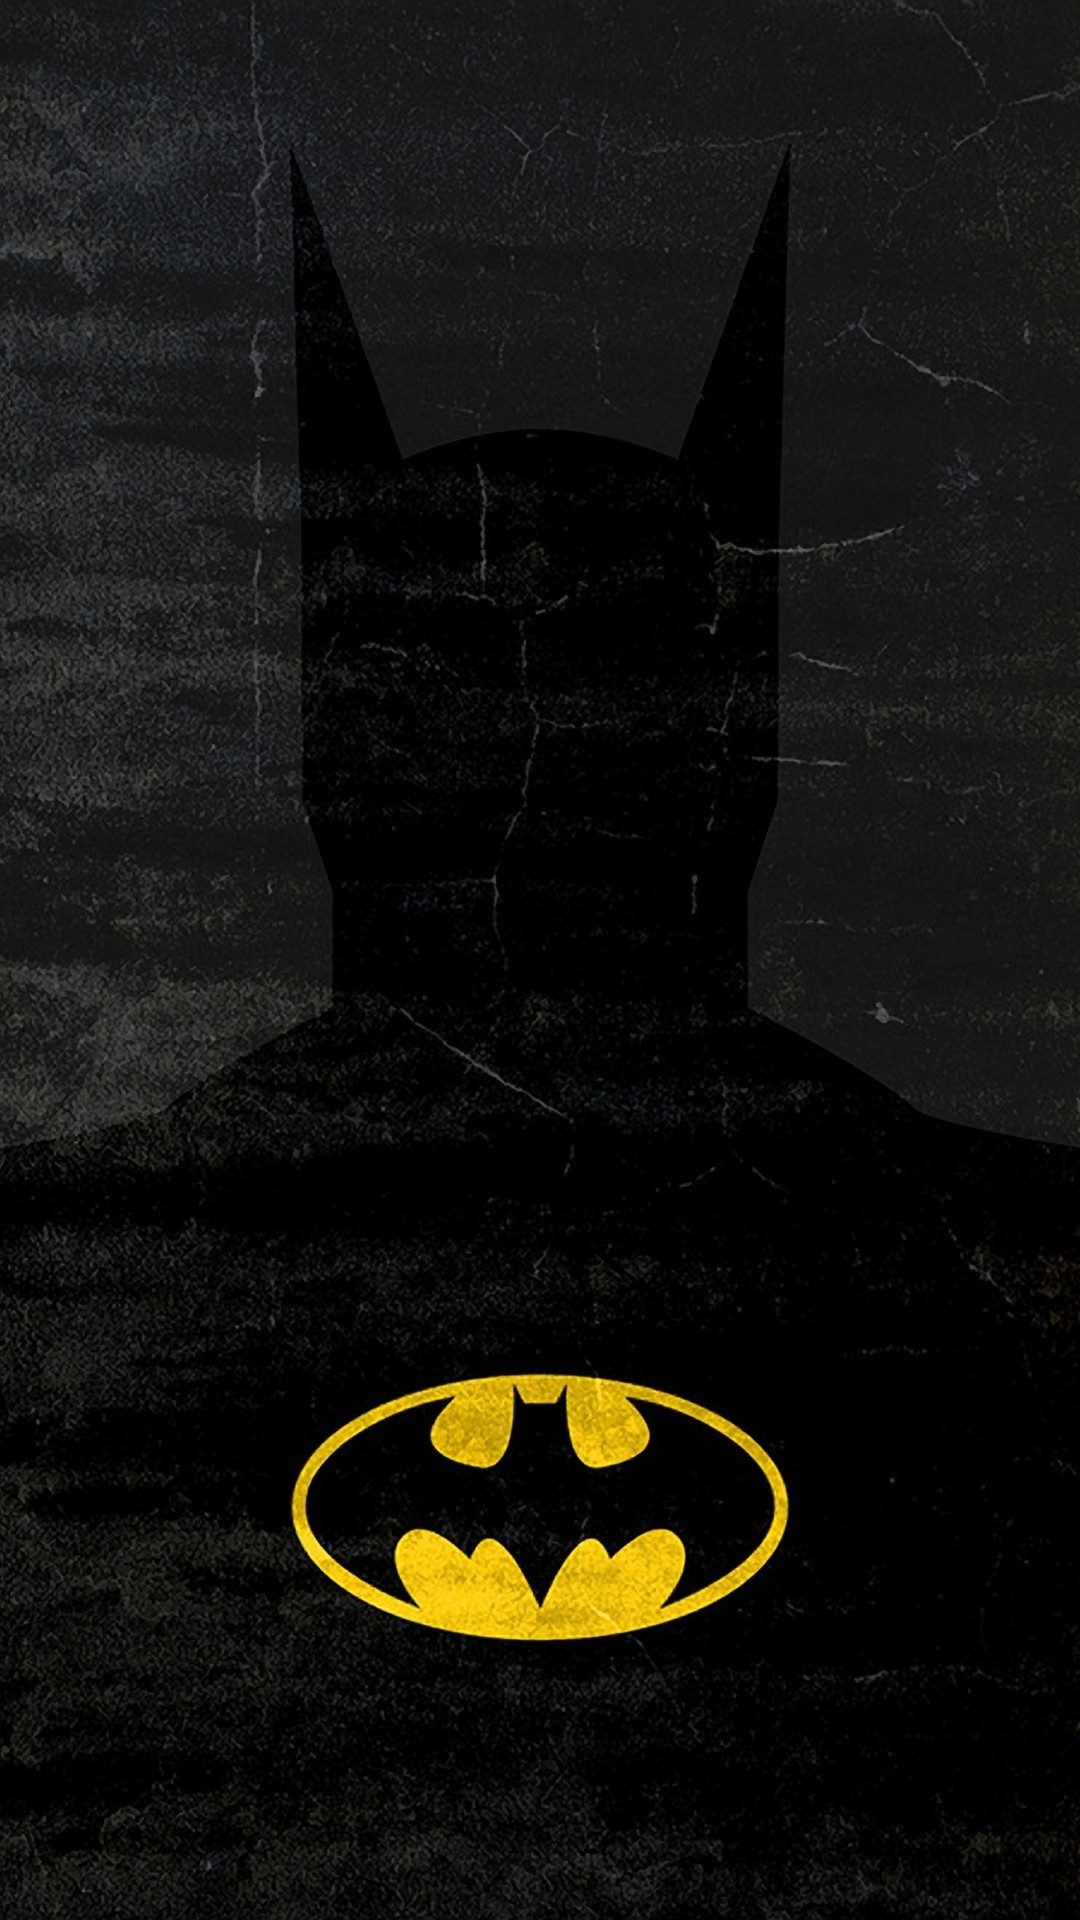 Collection of Batman Wallpaper Android on HDWallpapers